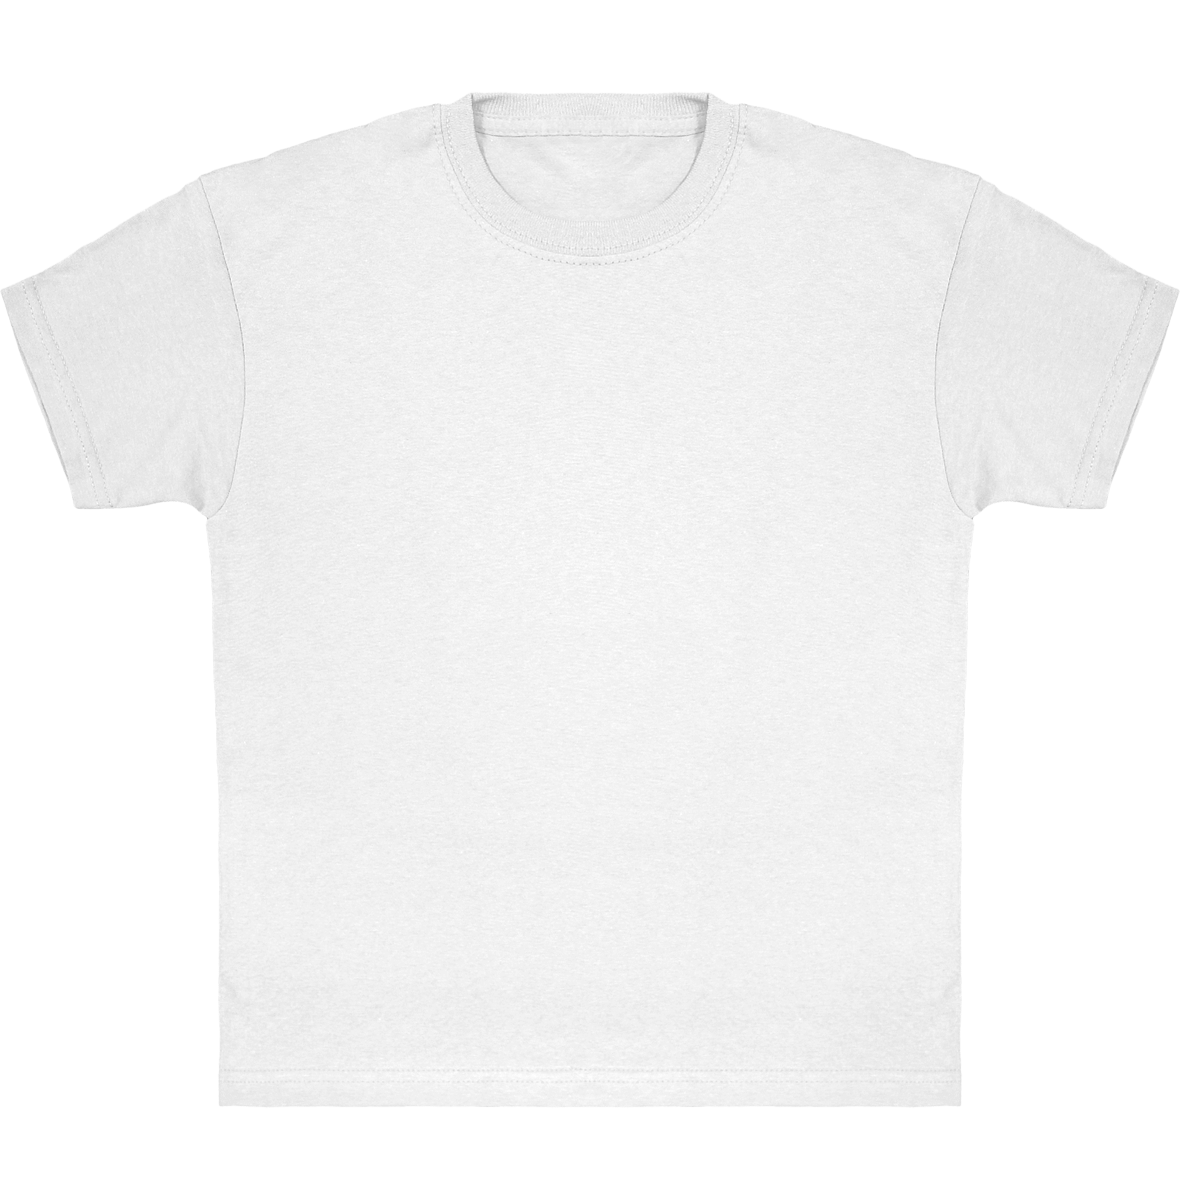 Classic Cotton T-Shirt For Children To Customize White